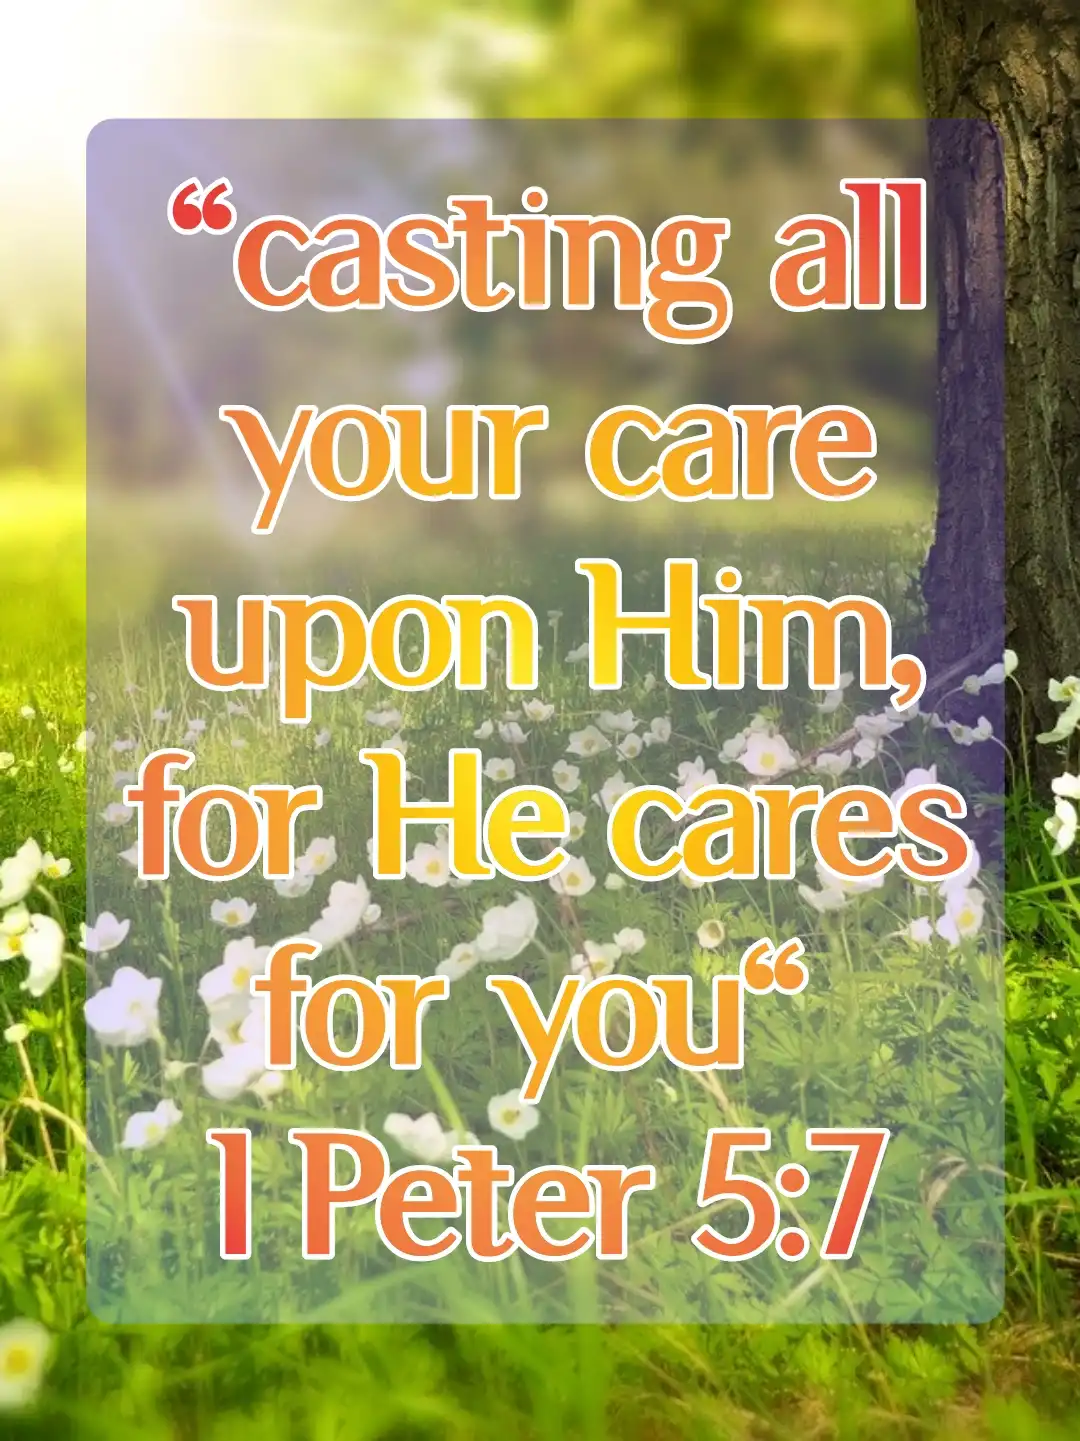 god will take care of you bible verses (1 Peter 5:7)